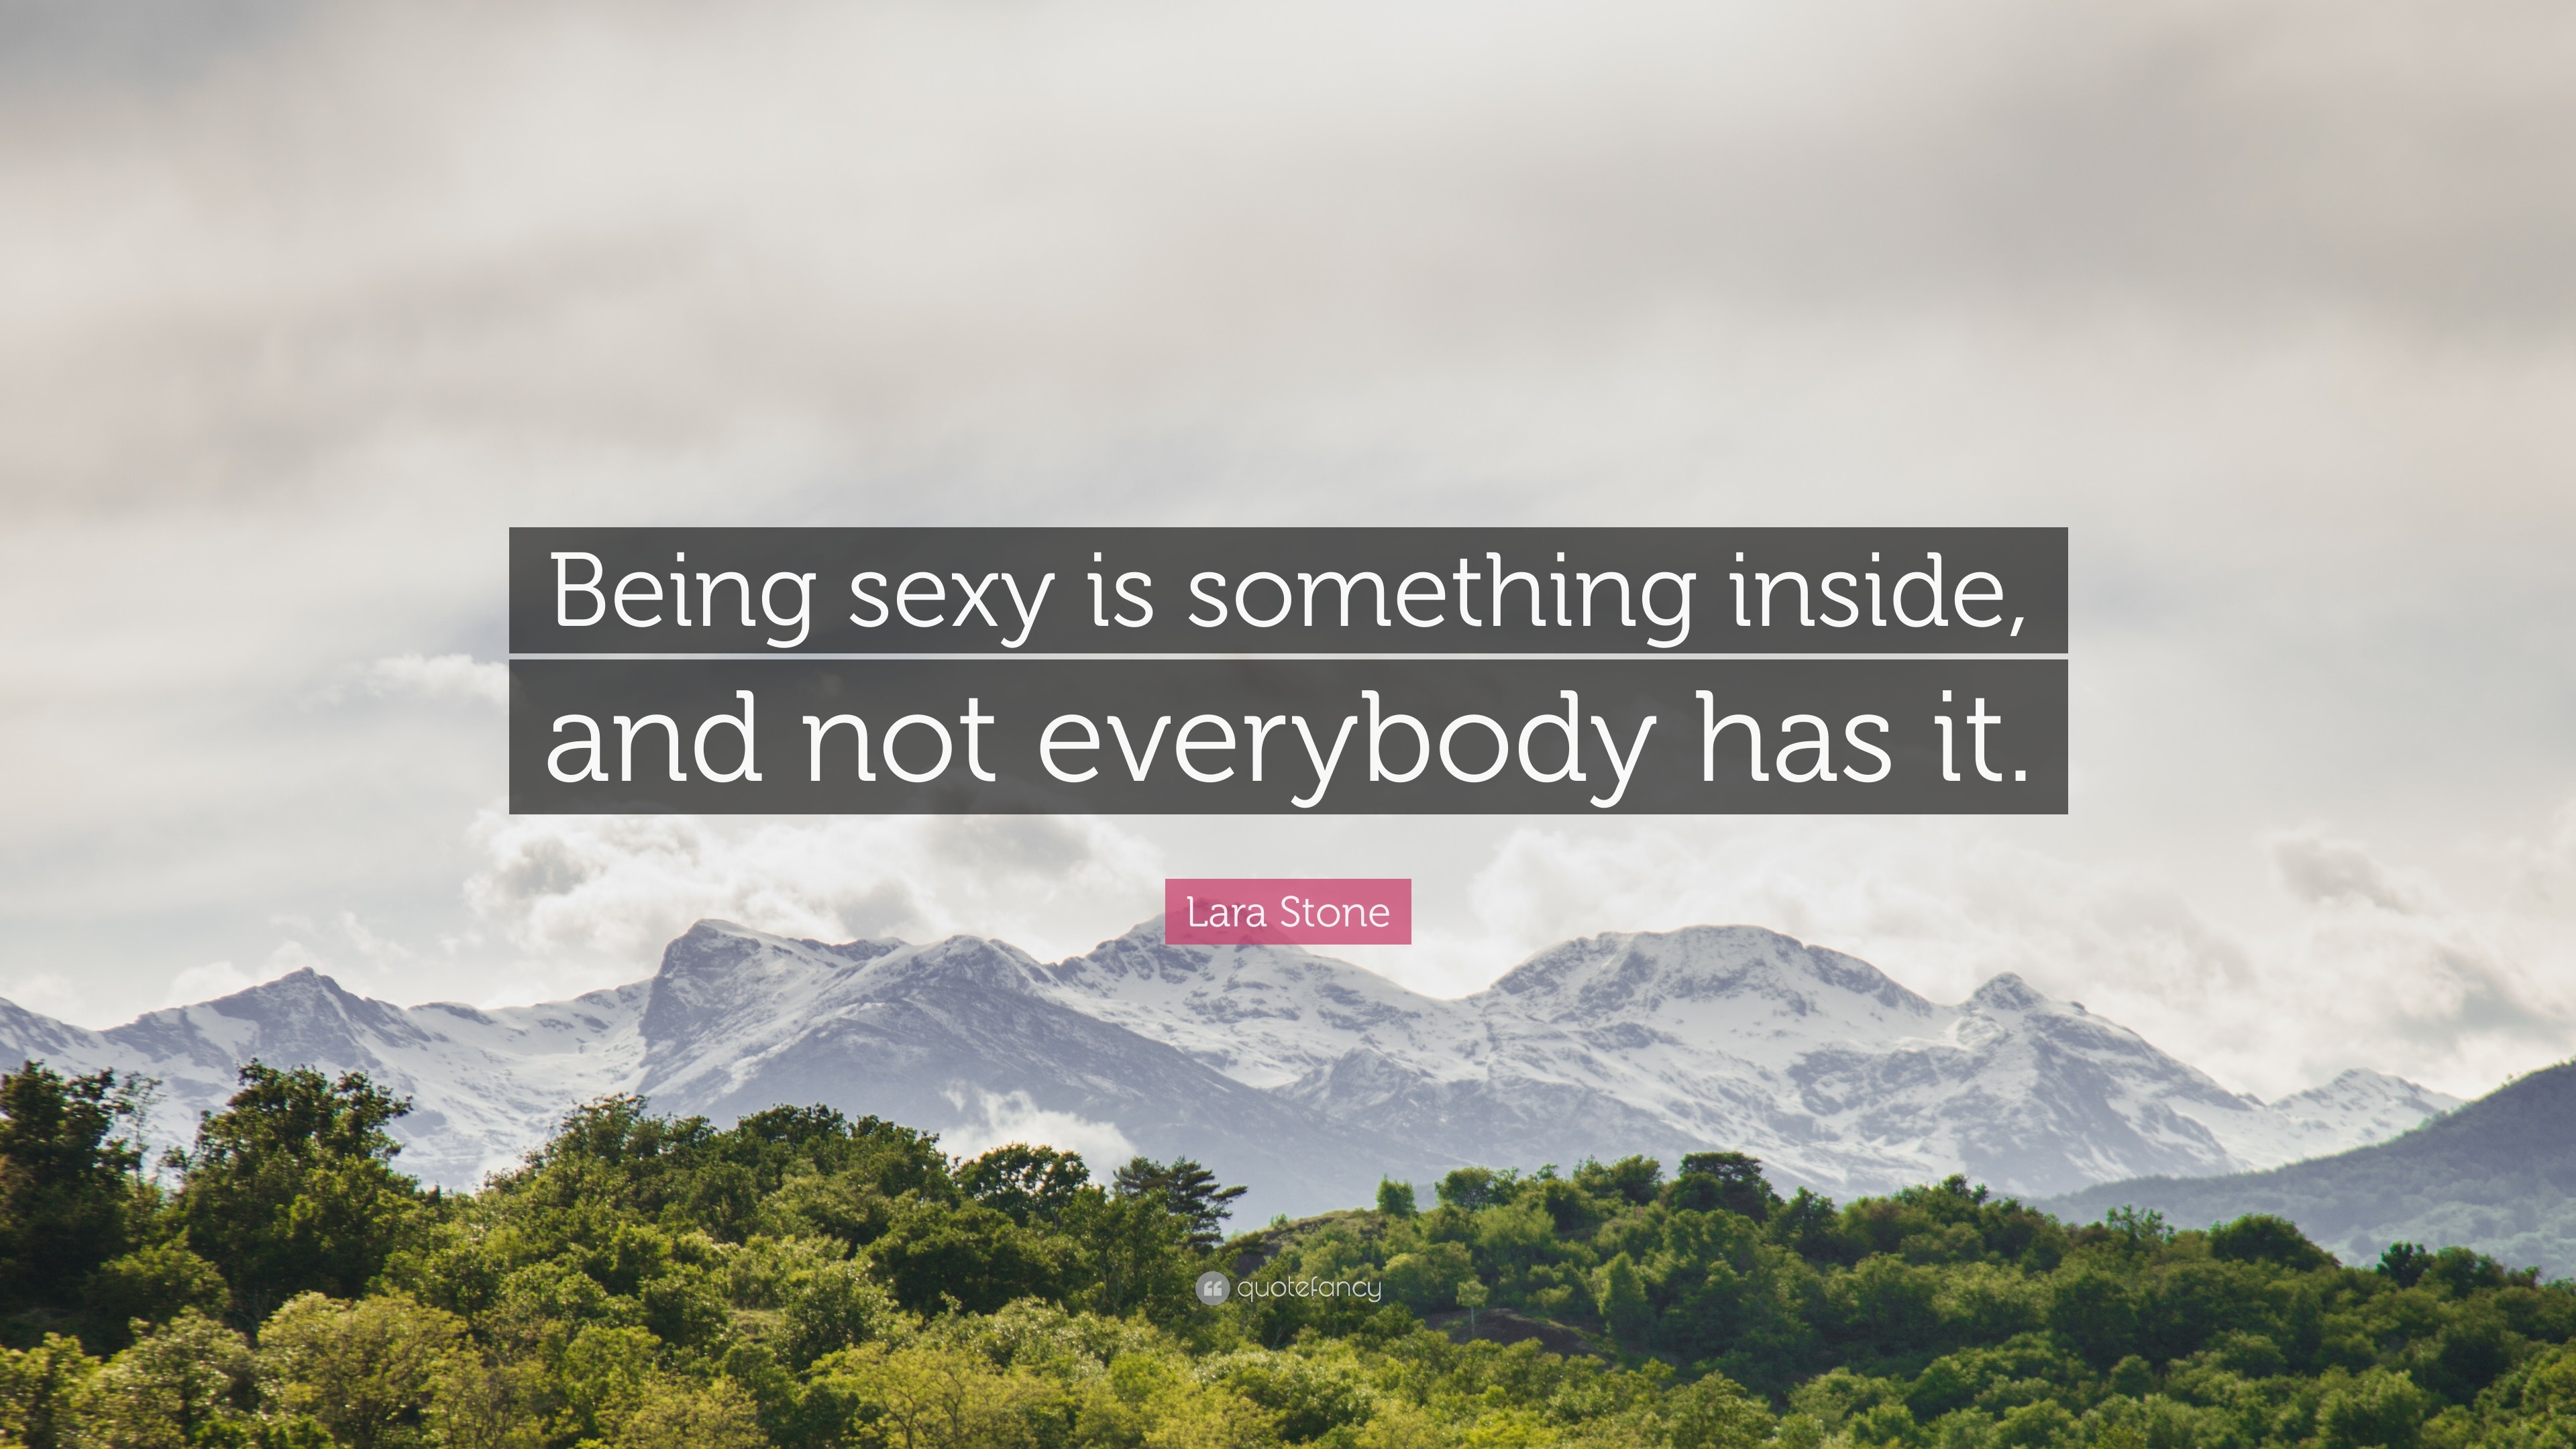 Quotes For Being Sexy